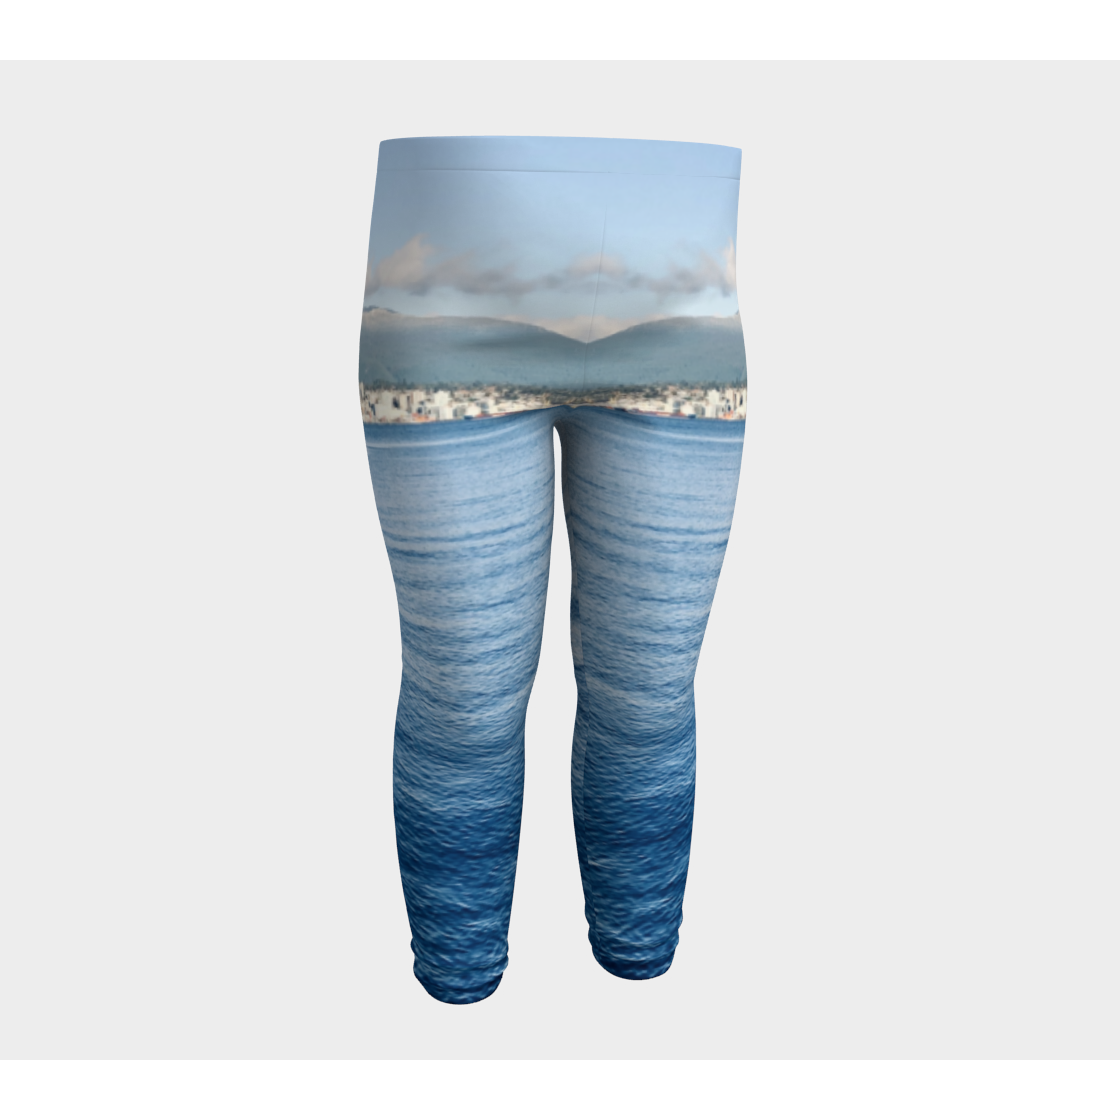 Baby Leggings for Children with: Ocean City Design, Front, 3 years